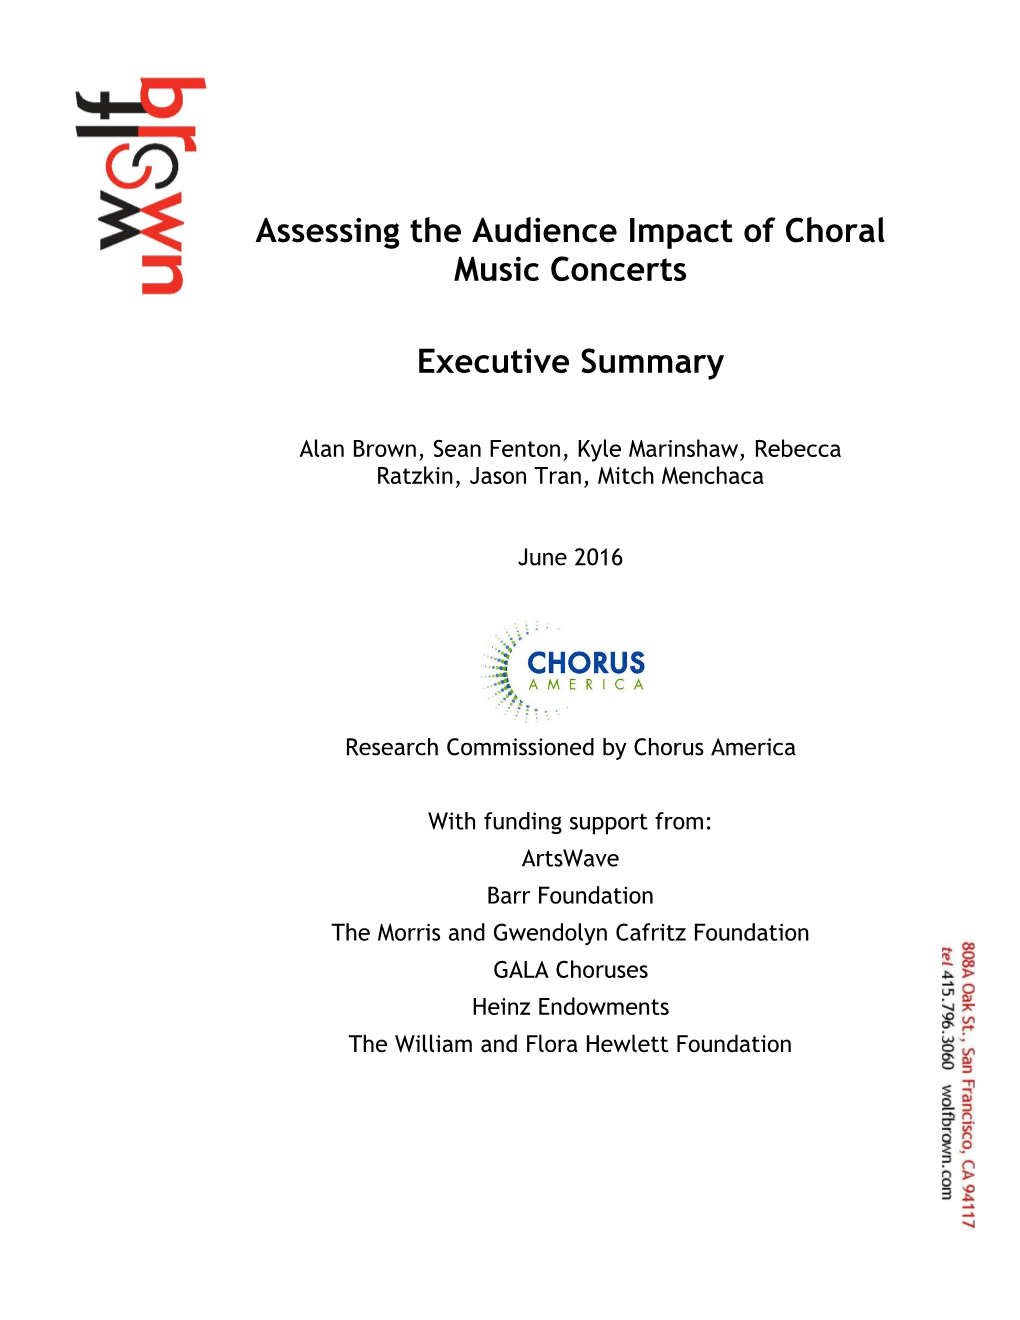 Assessing the Audience Impact of Choral Music Concerts Executive Summary